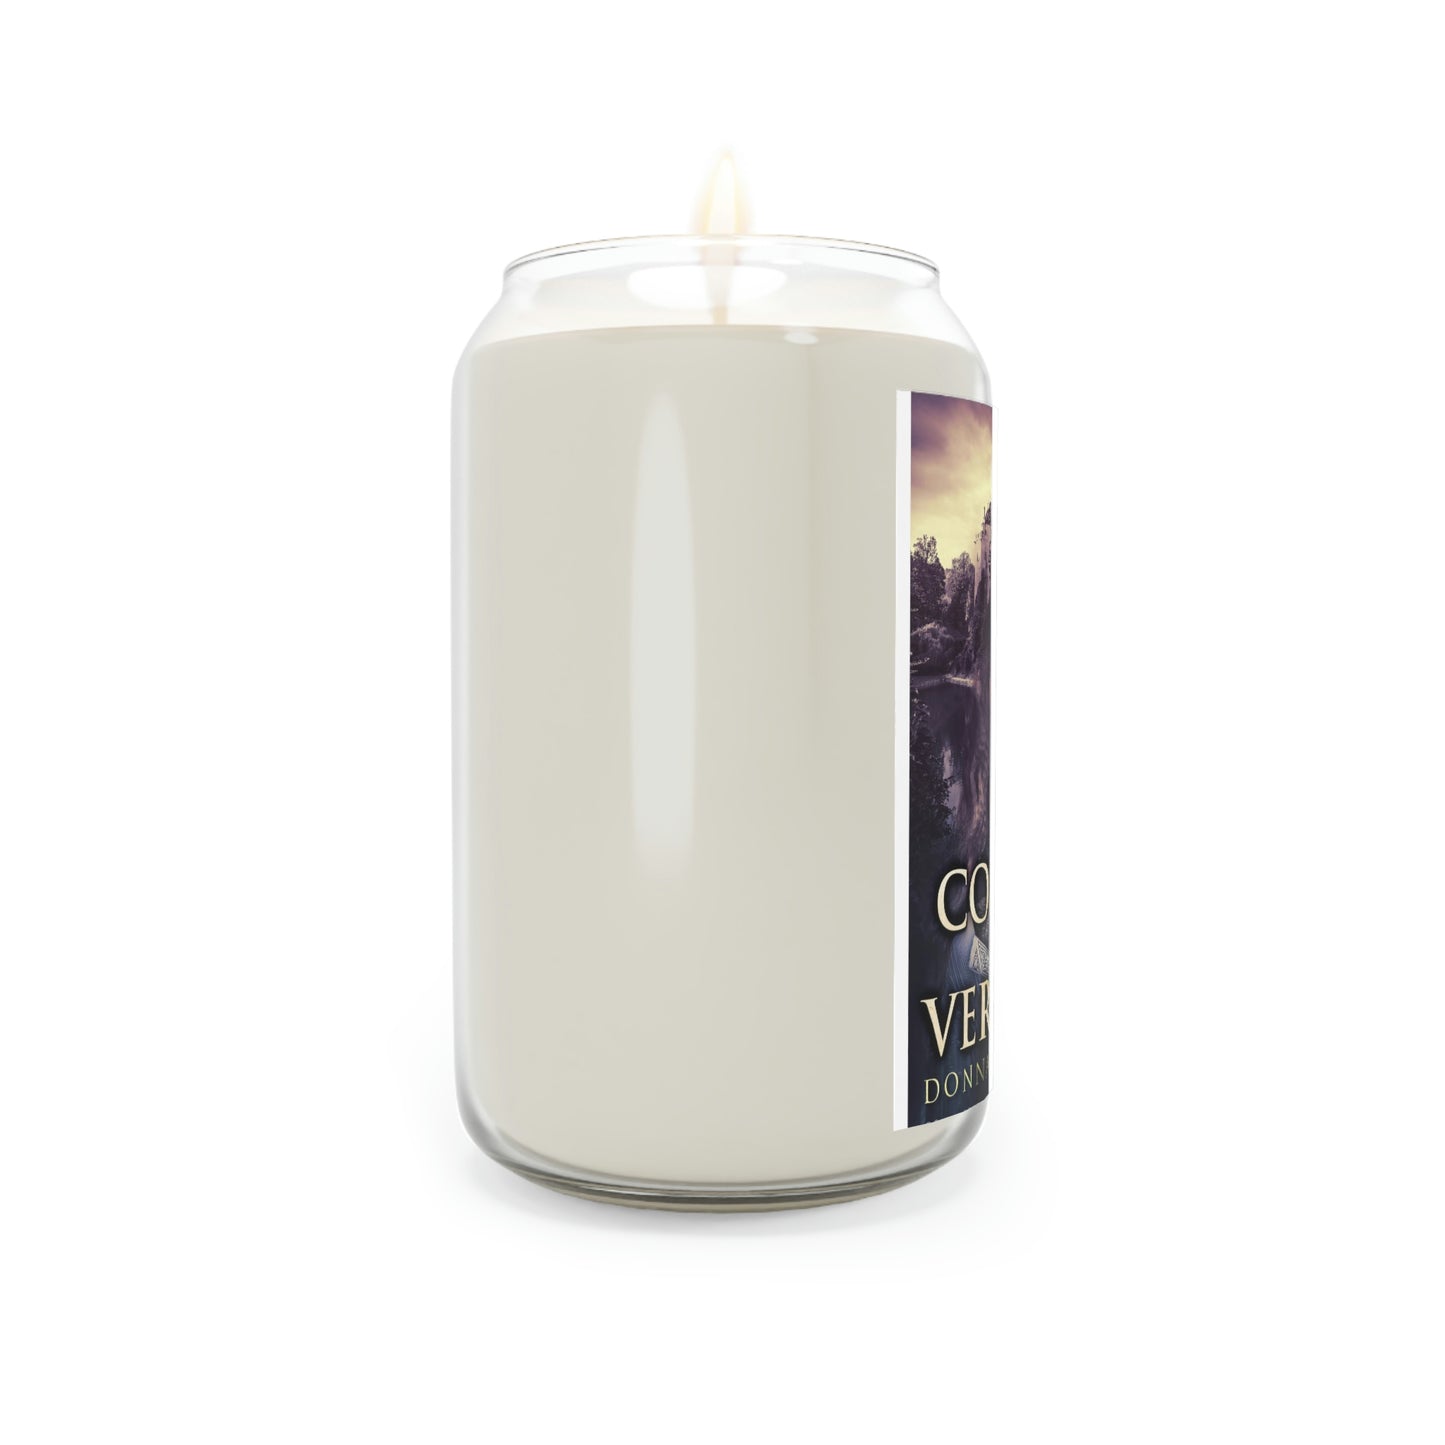 The Courtier of Versailles - Scented Candle